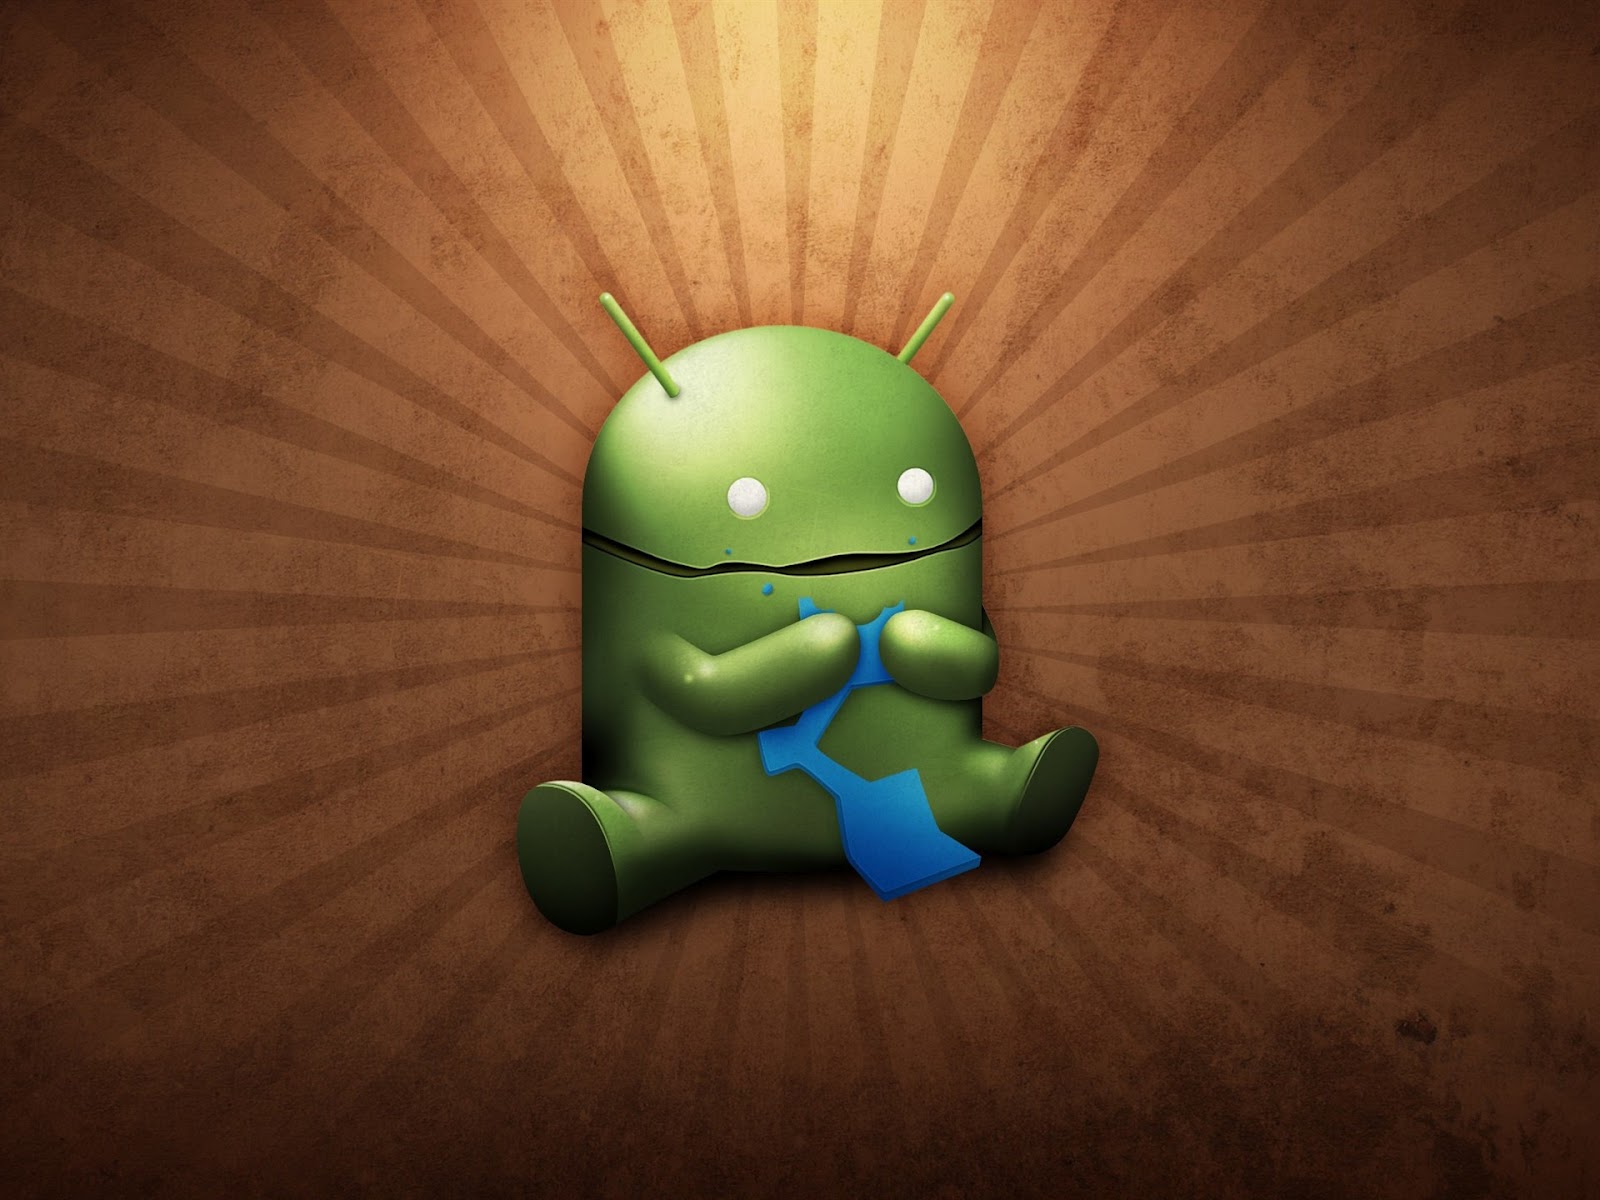 android funny image logo wallpaper android funny image logo wallpaper ...